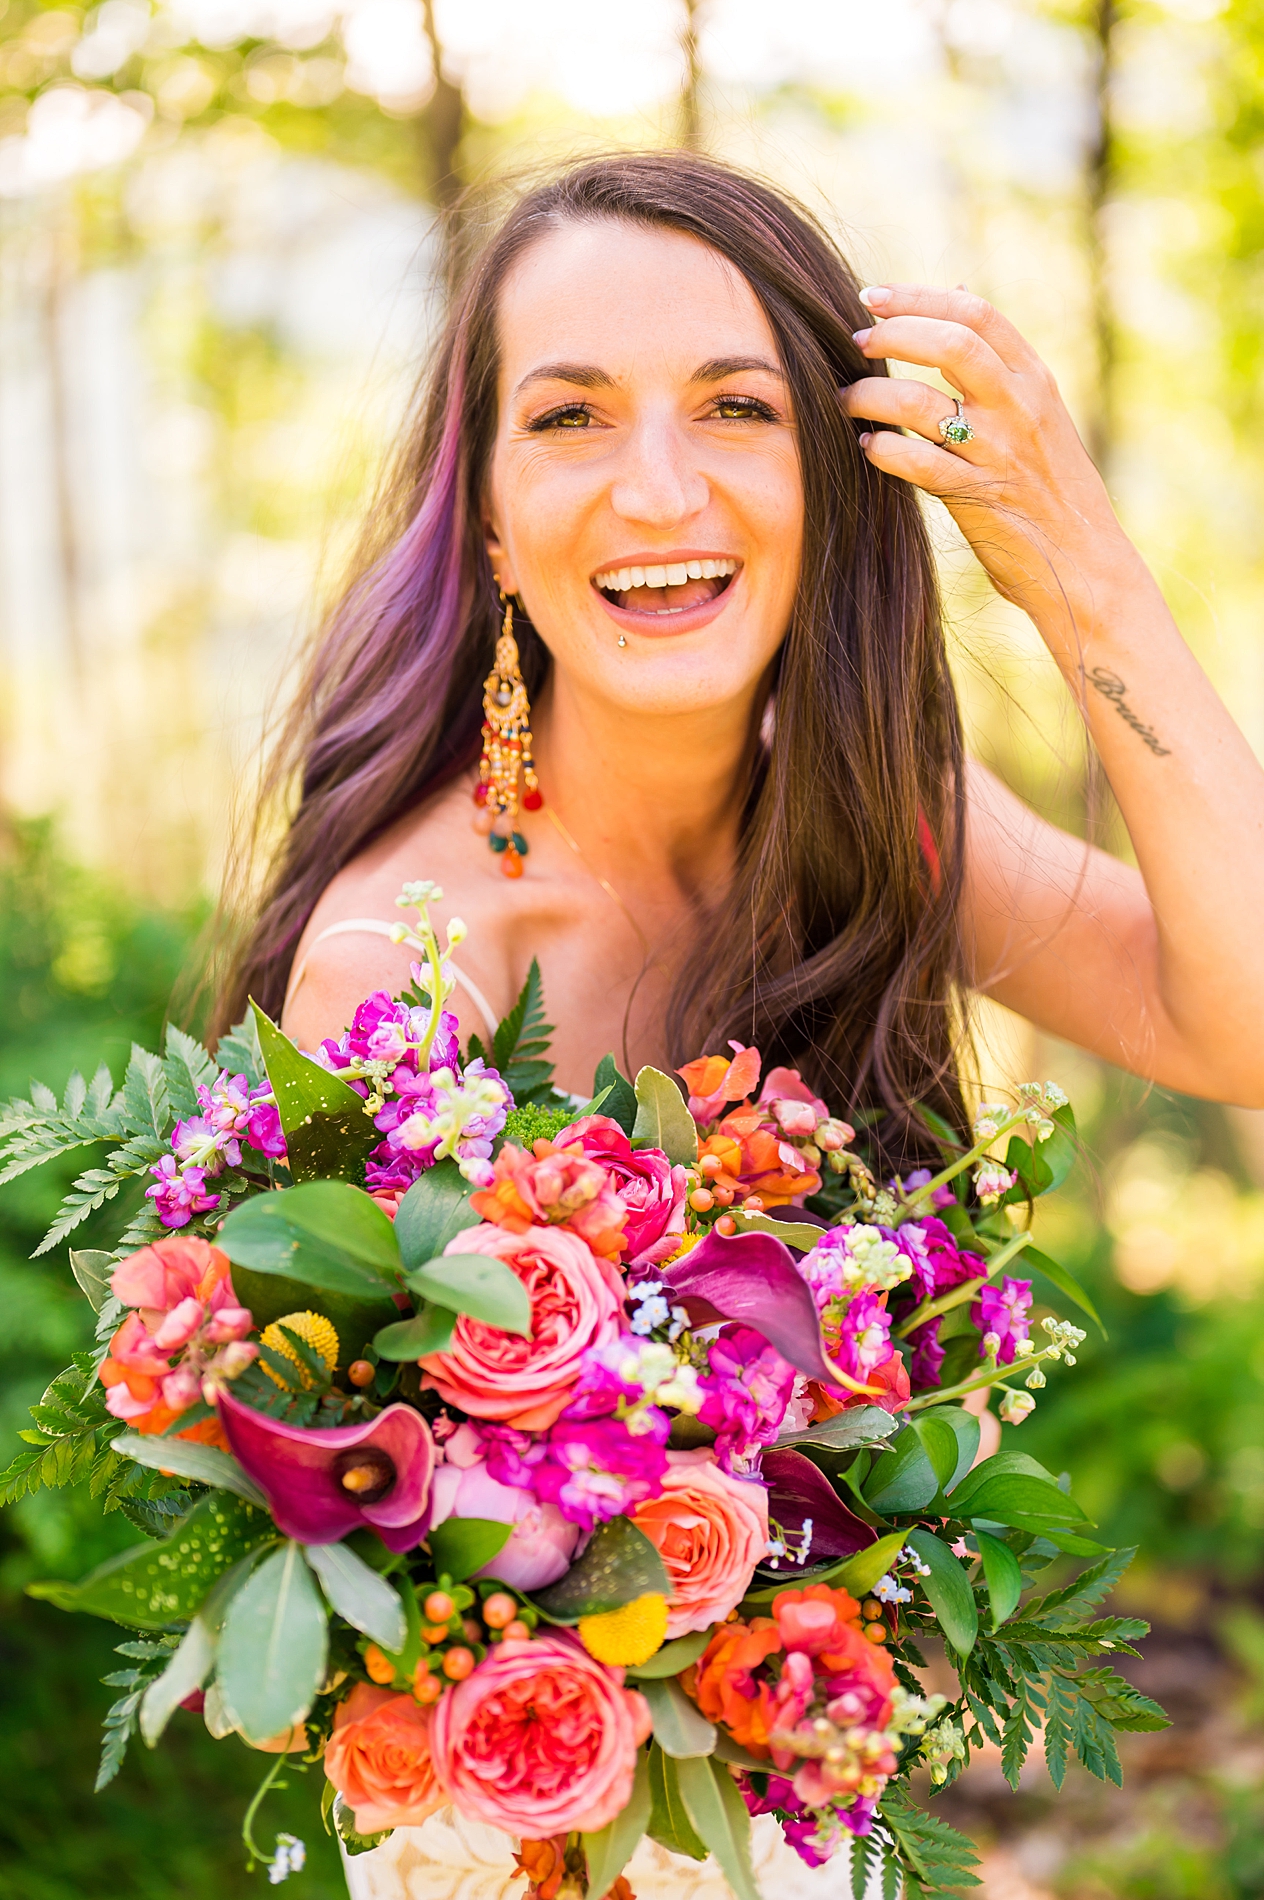 bride holding her colorful wedding flower bouquet   